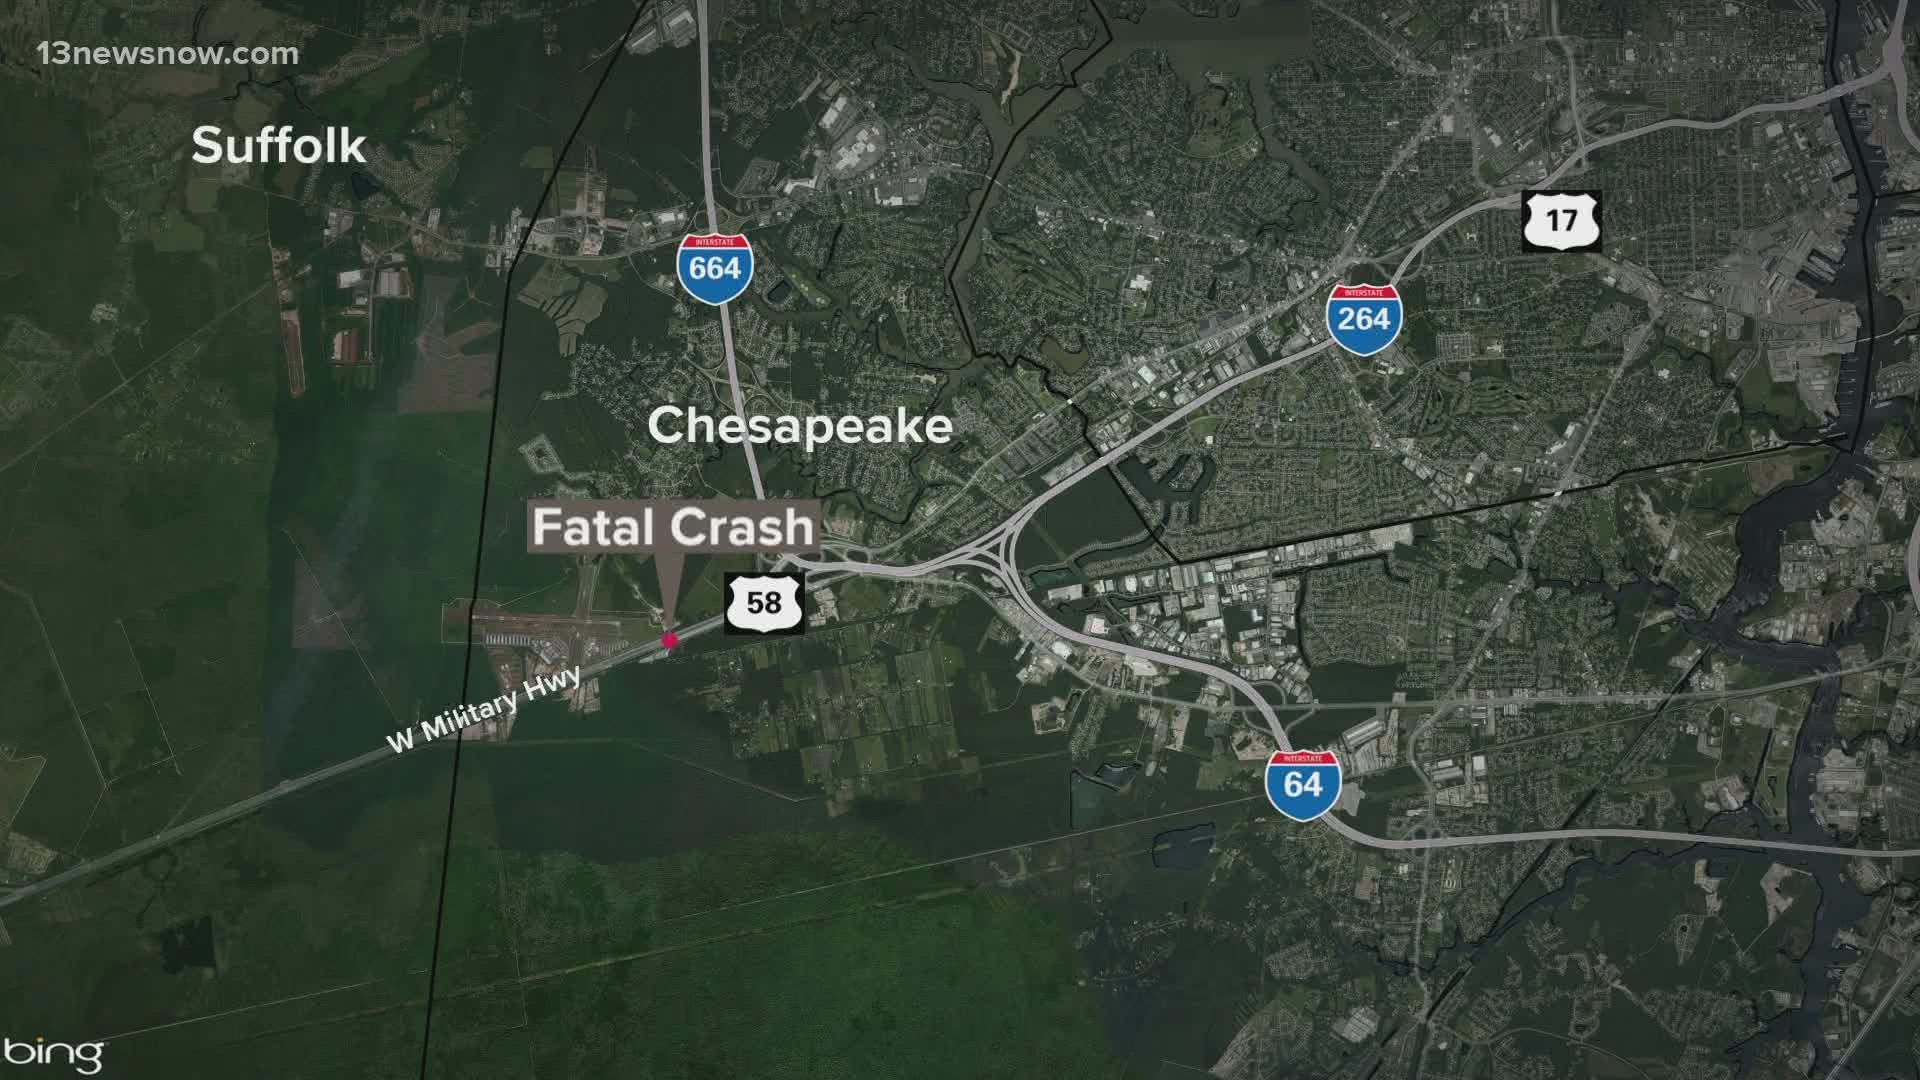 A woman was killed in a crash between a car and a tractor-trailer on Highway 58 in Chesapeake Wednesday morning, according to police.